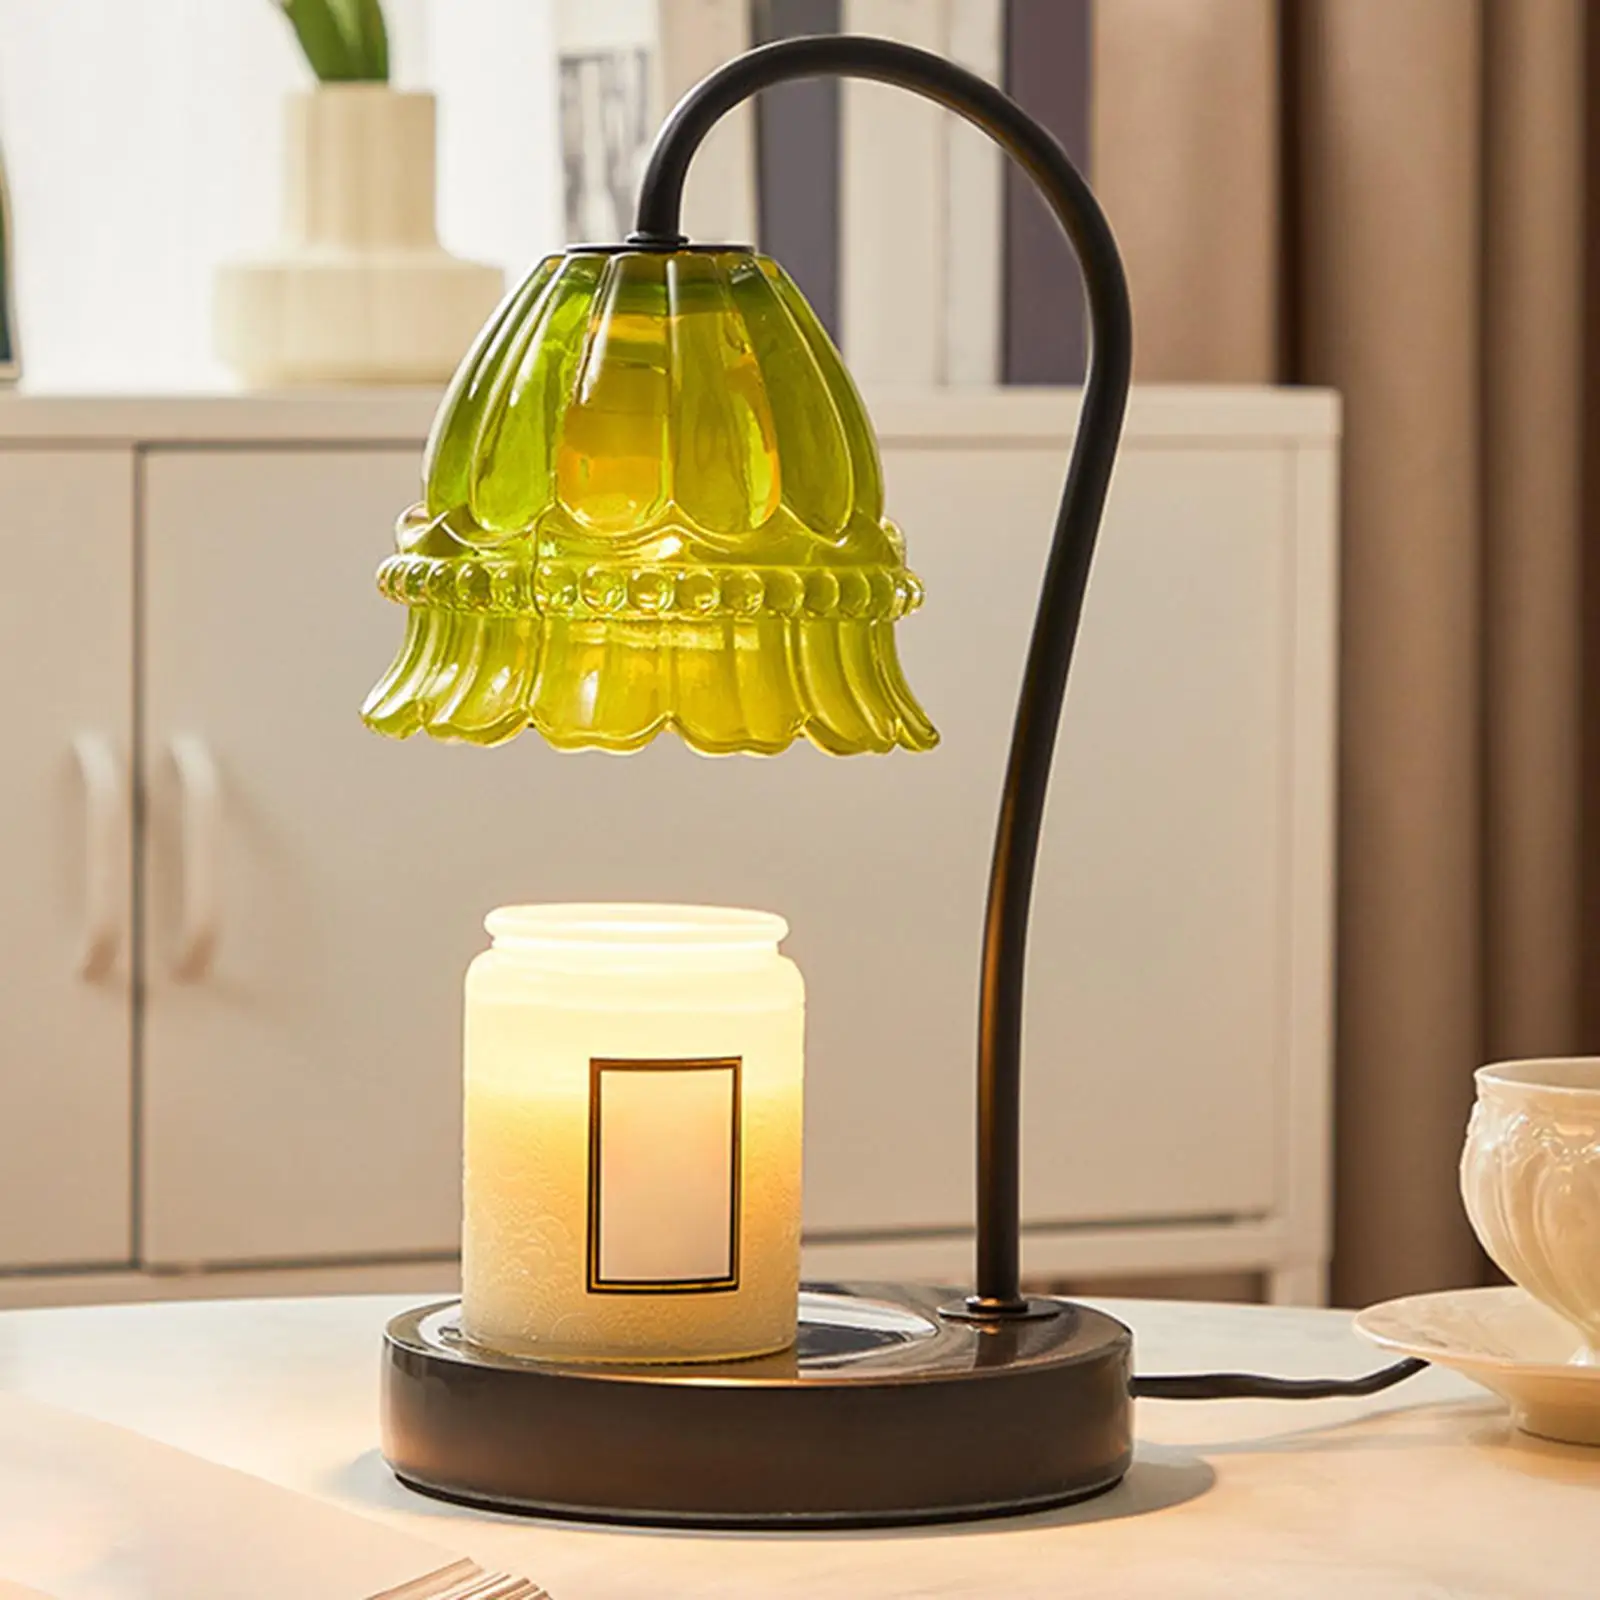 European Style Candle Warmer Lamp Adjustable Marble Lamp Bedside Lights Dimmable